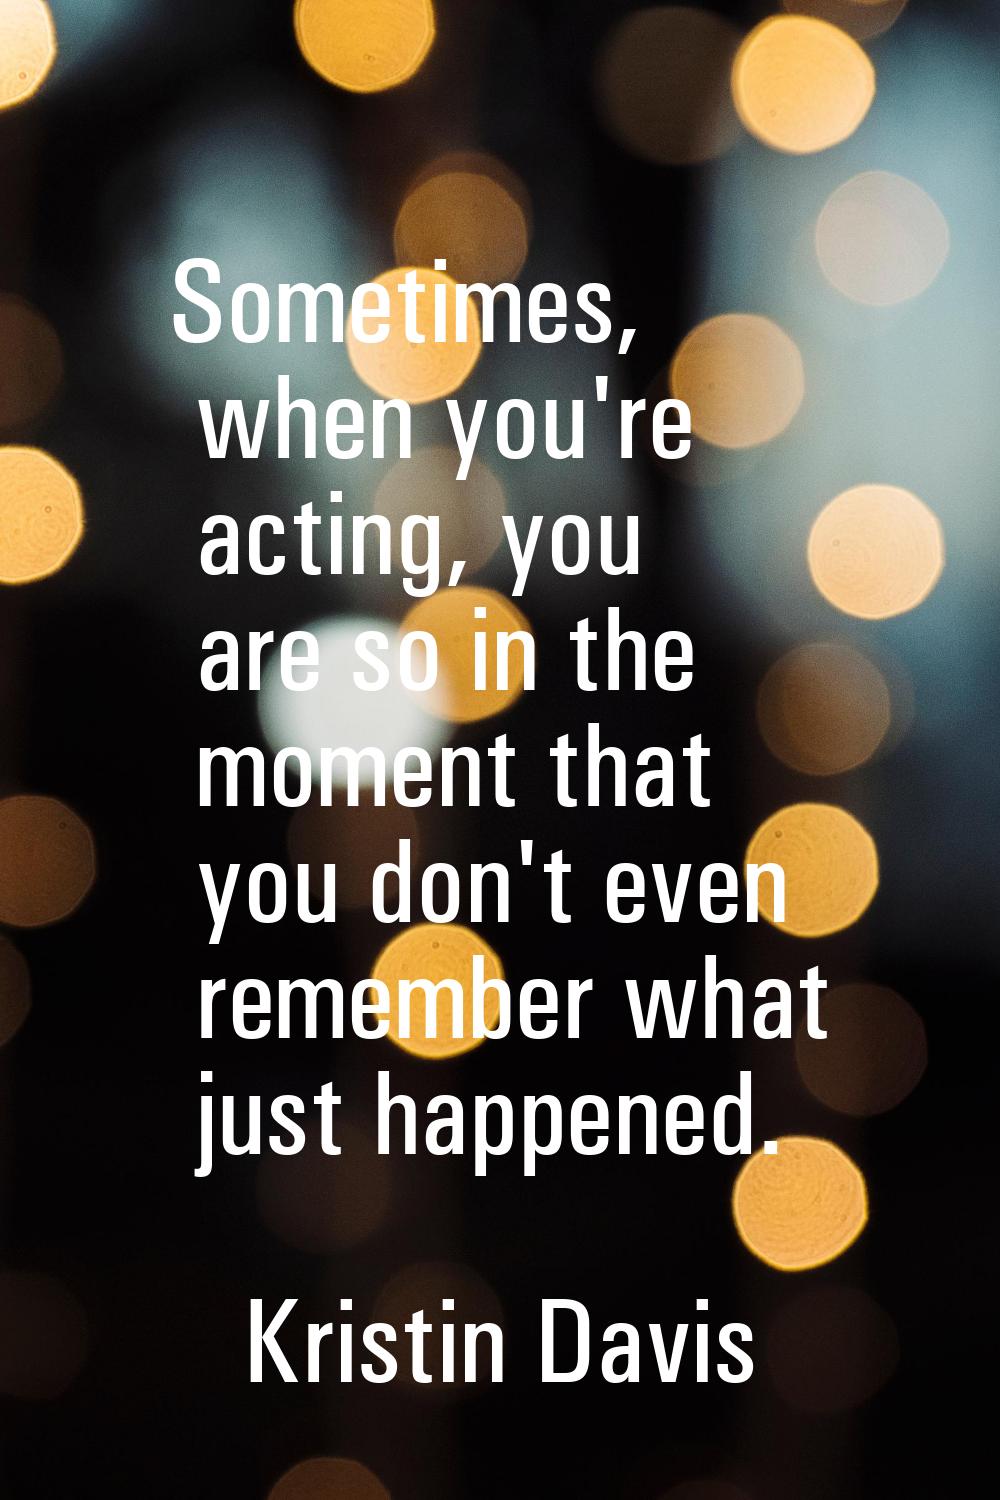 Sometimes, when you're acting, you are so in the moment that you don't even remember what just happ